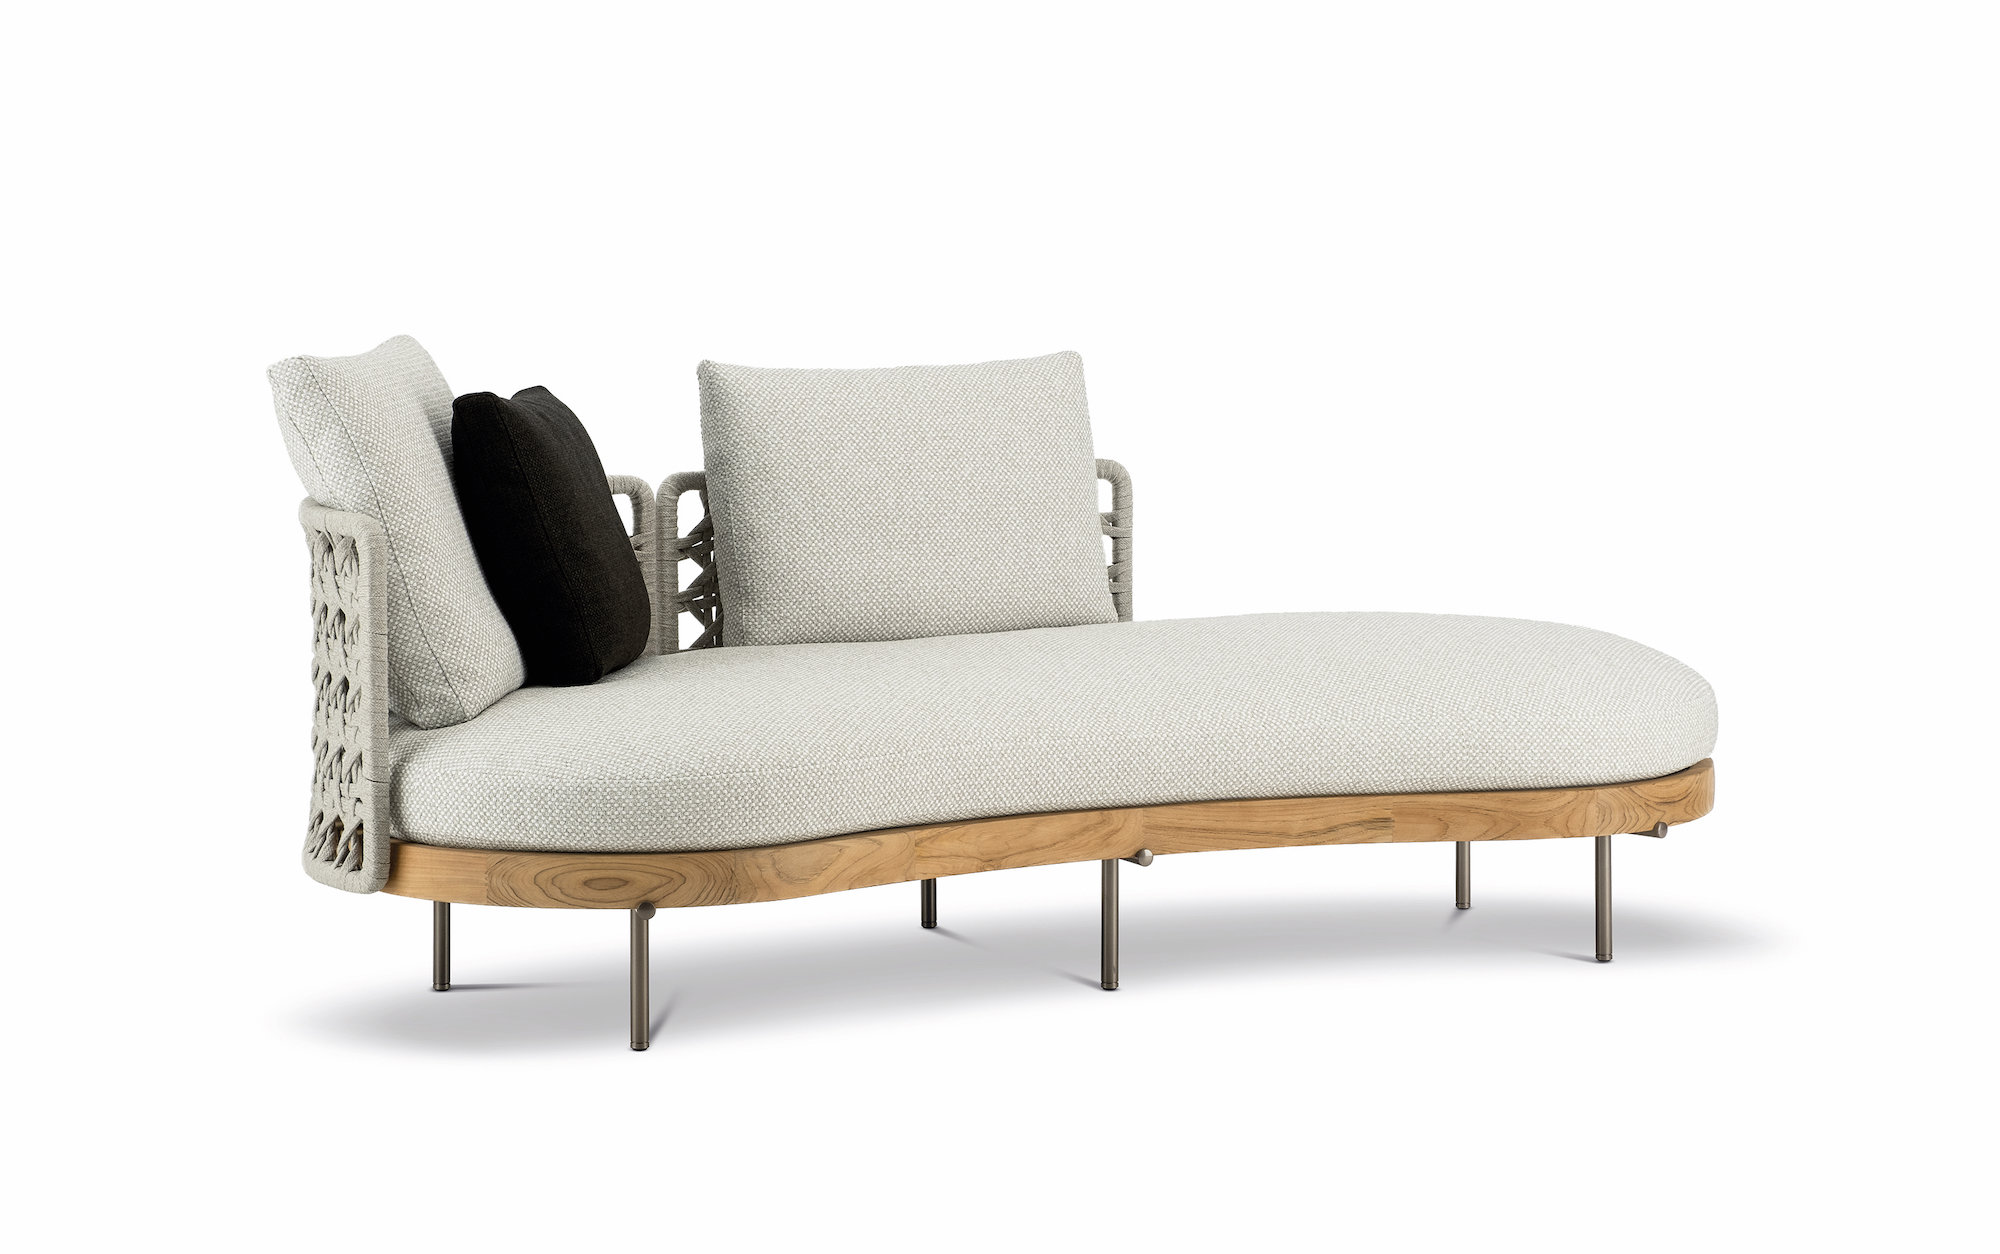 TORII NEST OUTDOOR 10 ANGLED OPEN END SOFA